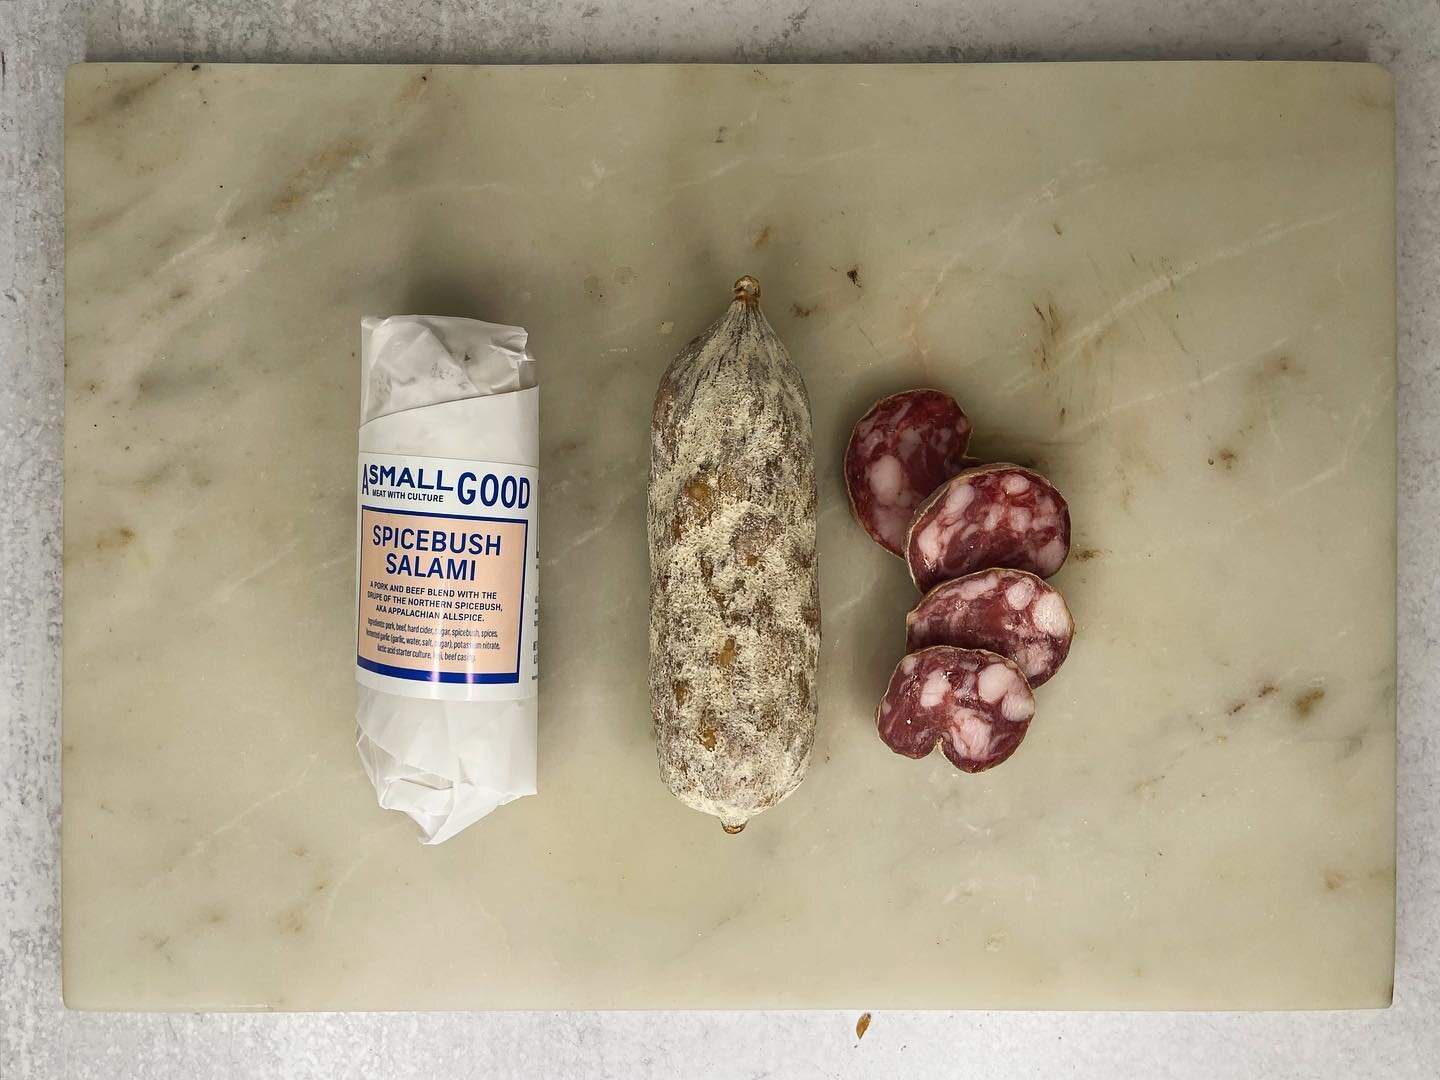 Our Spicebush salami is made using the drupe of the Northern Spicebush shrub. From the laurel family, it grows native throughout eastern North America.  Known as Appalachian allspice am down south, it blends well with warm spices and has a flavour so